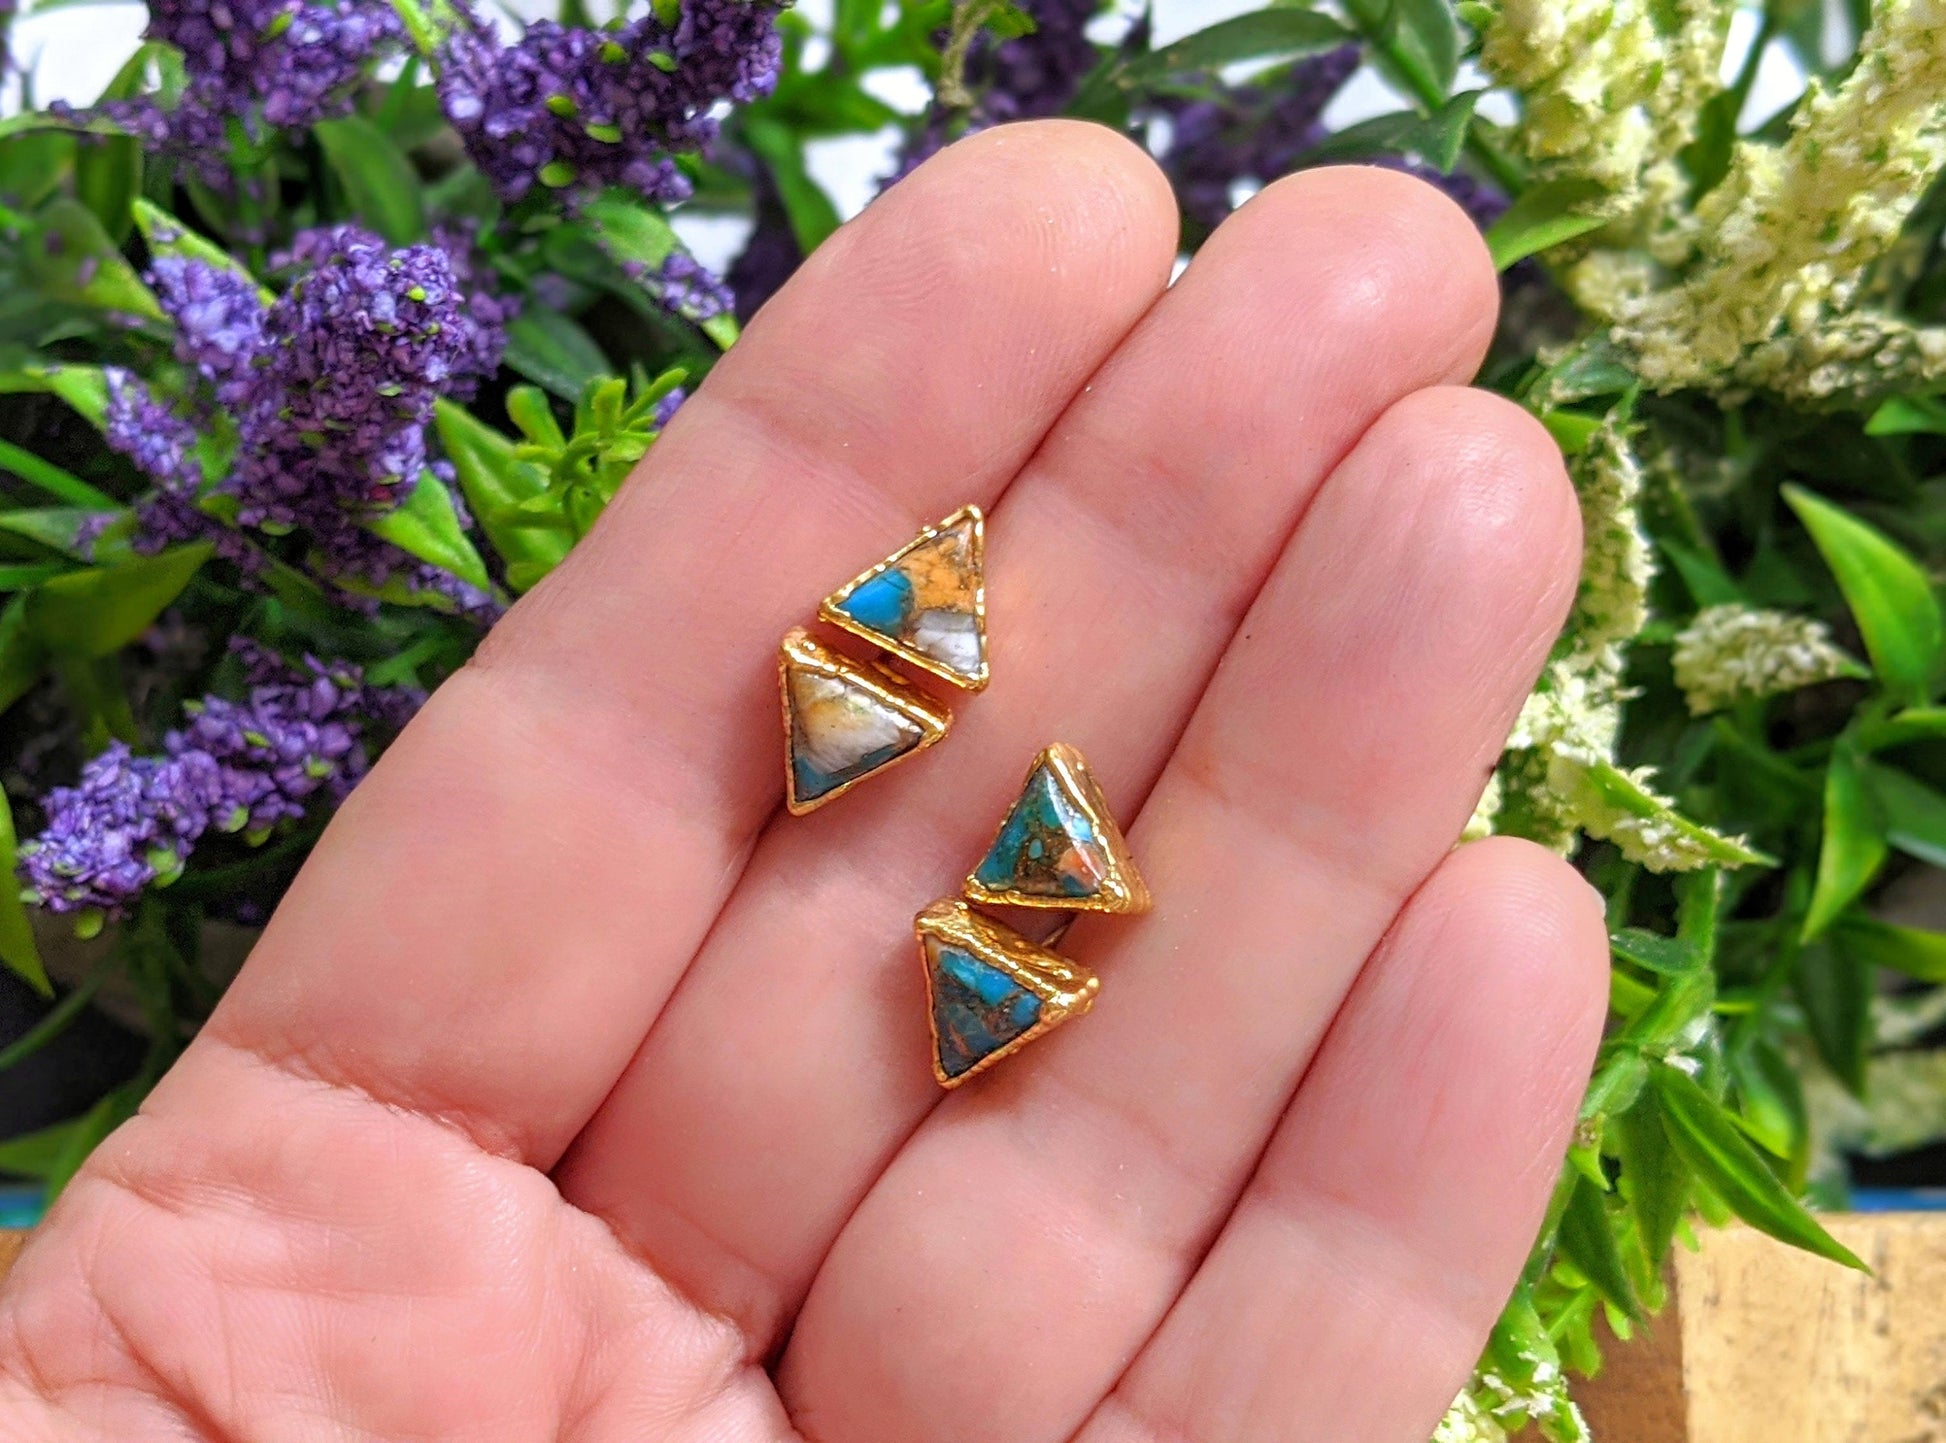 Spiny Oyster Copper stud earrings in unique triangular 18k Gold setting